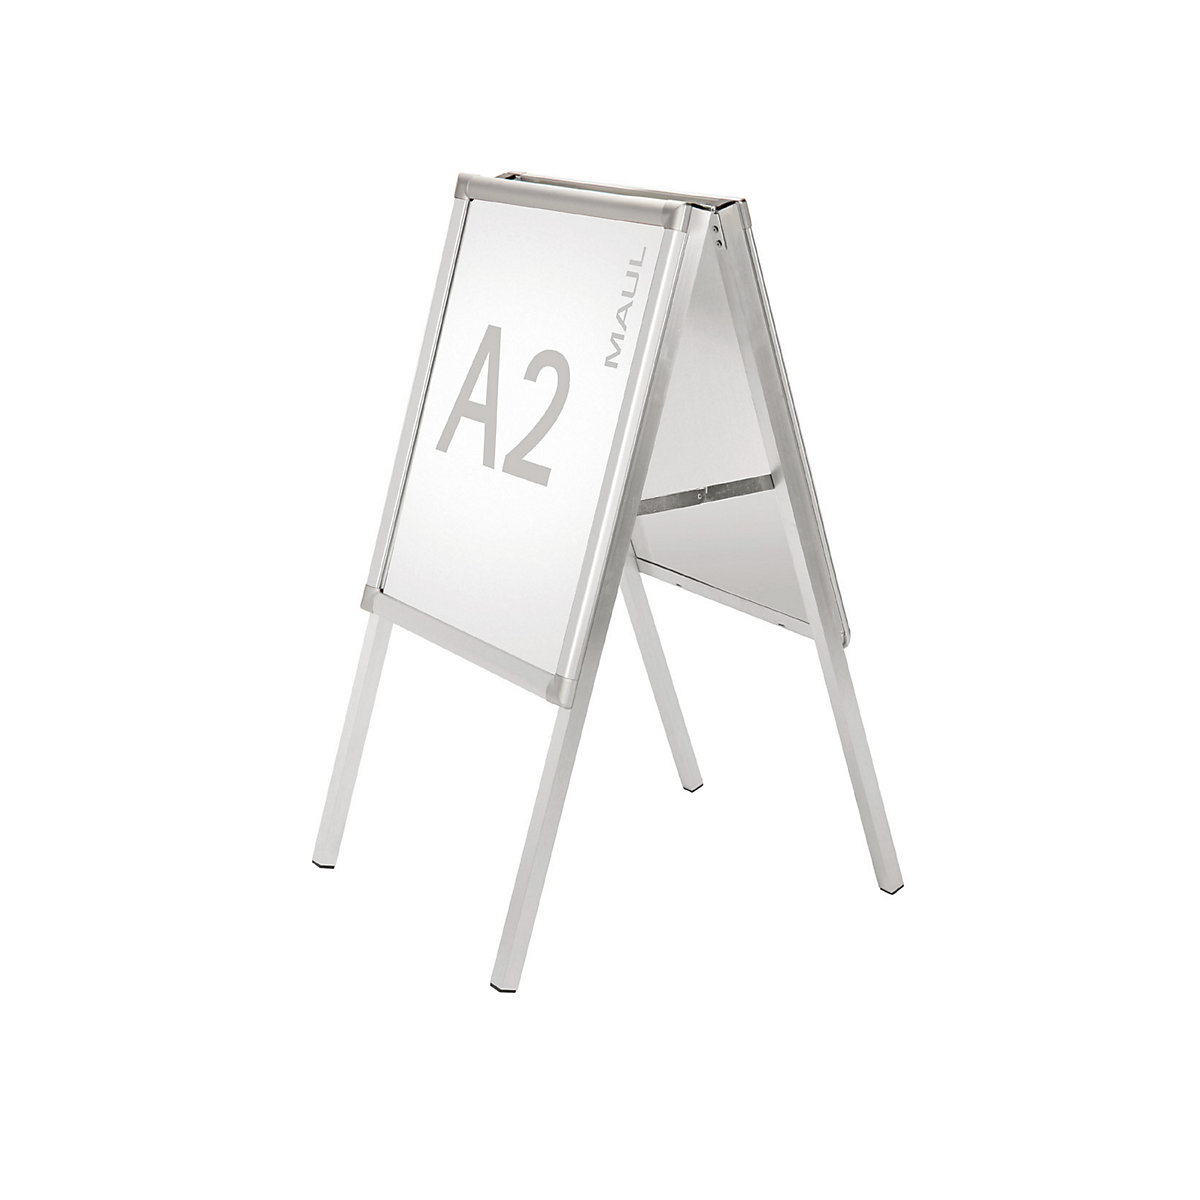 Display stand, double sided - MAUL